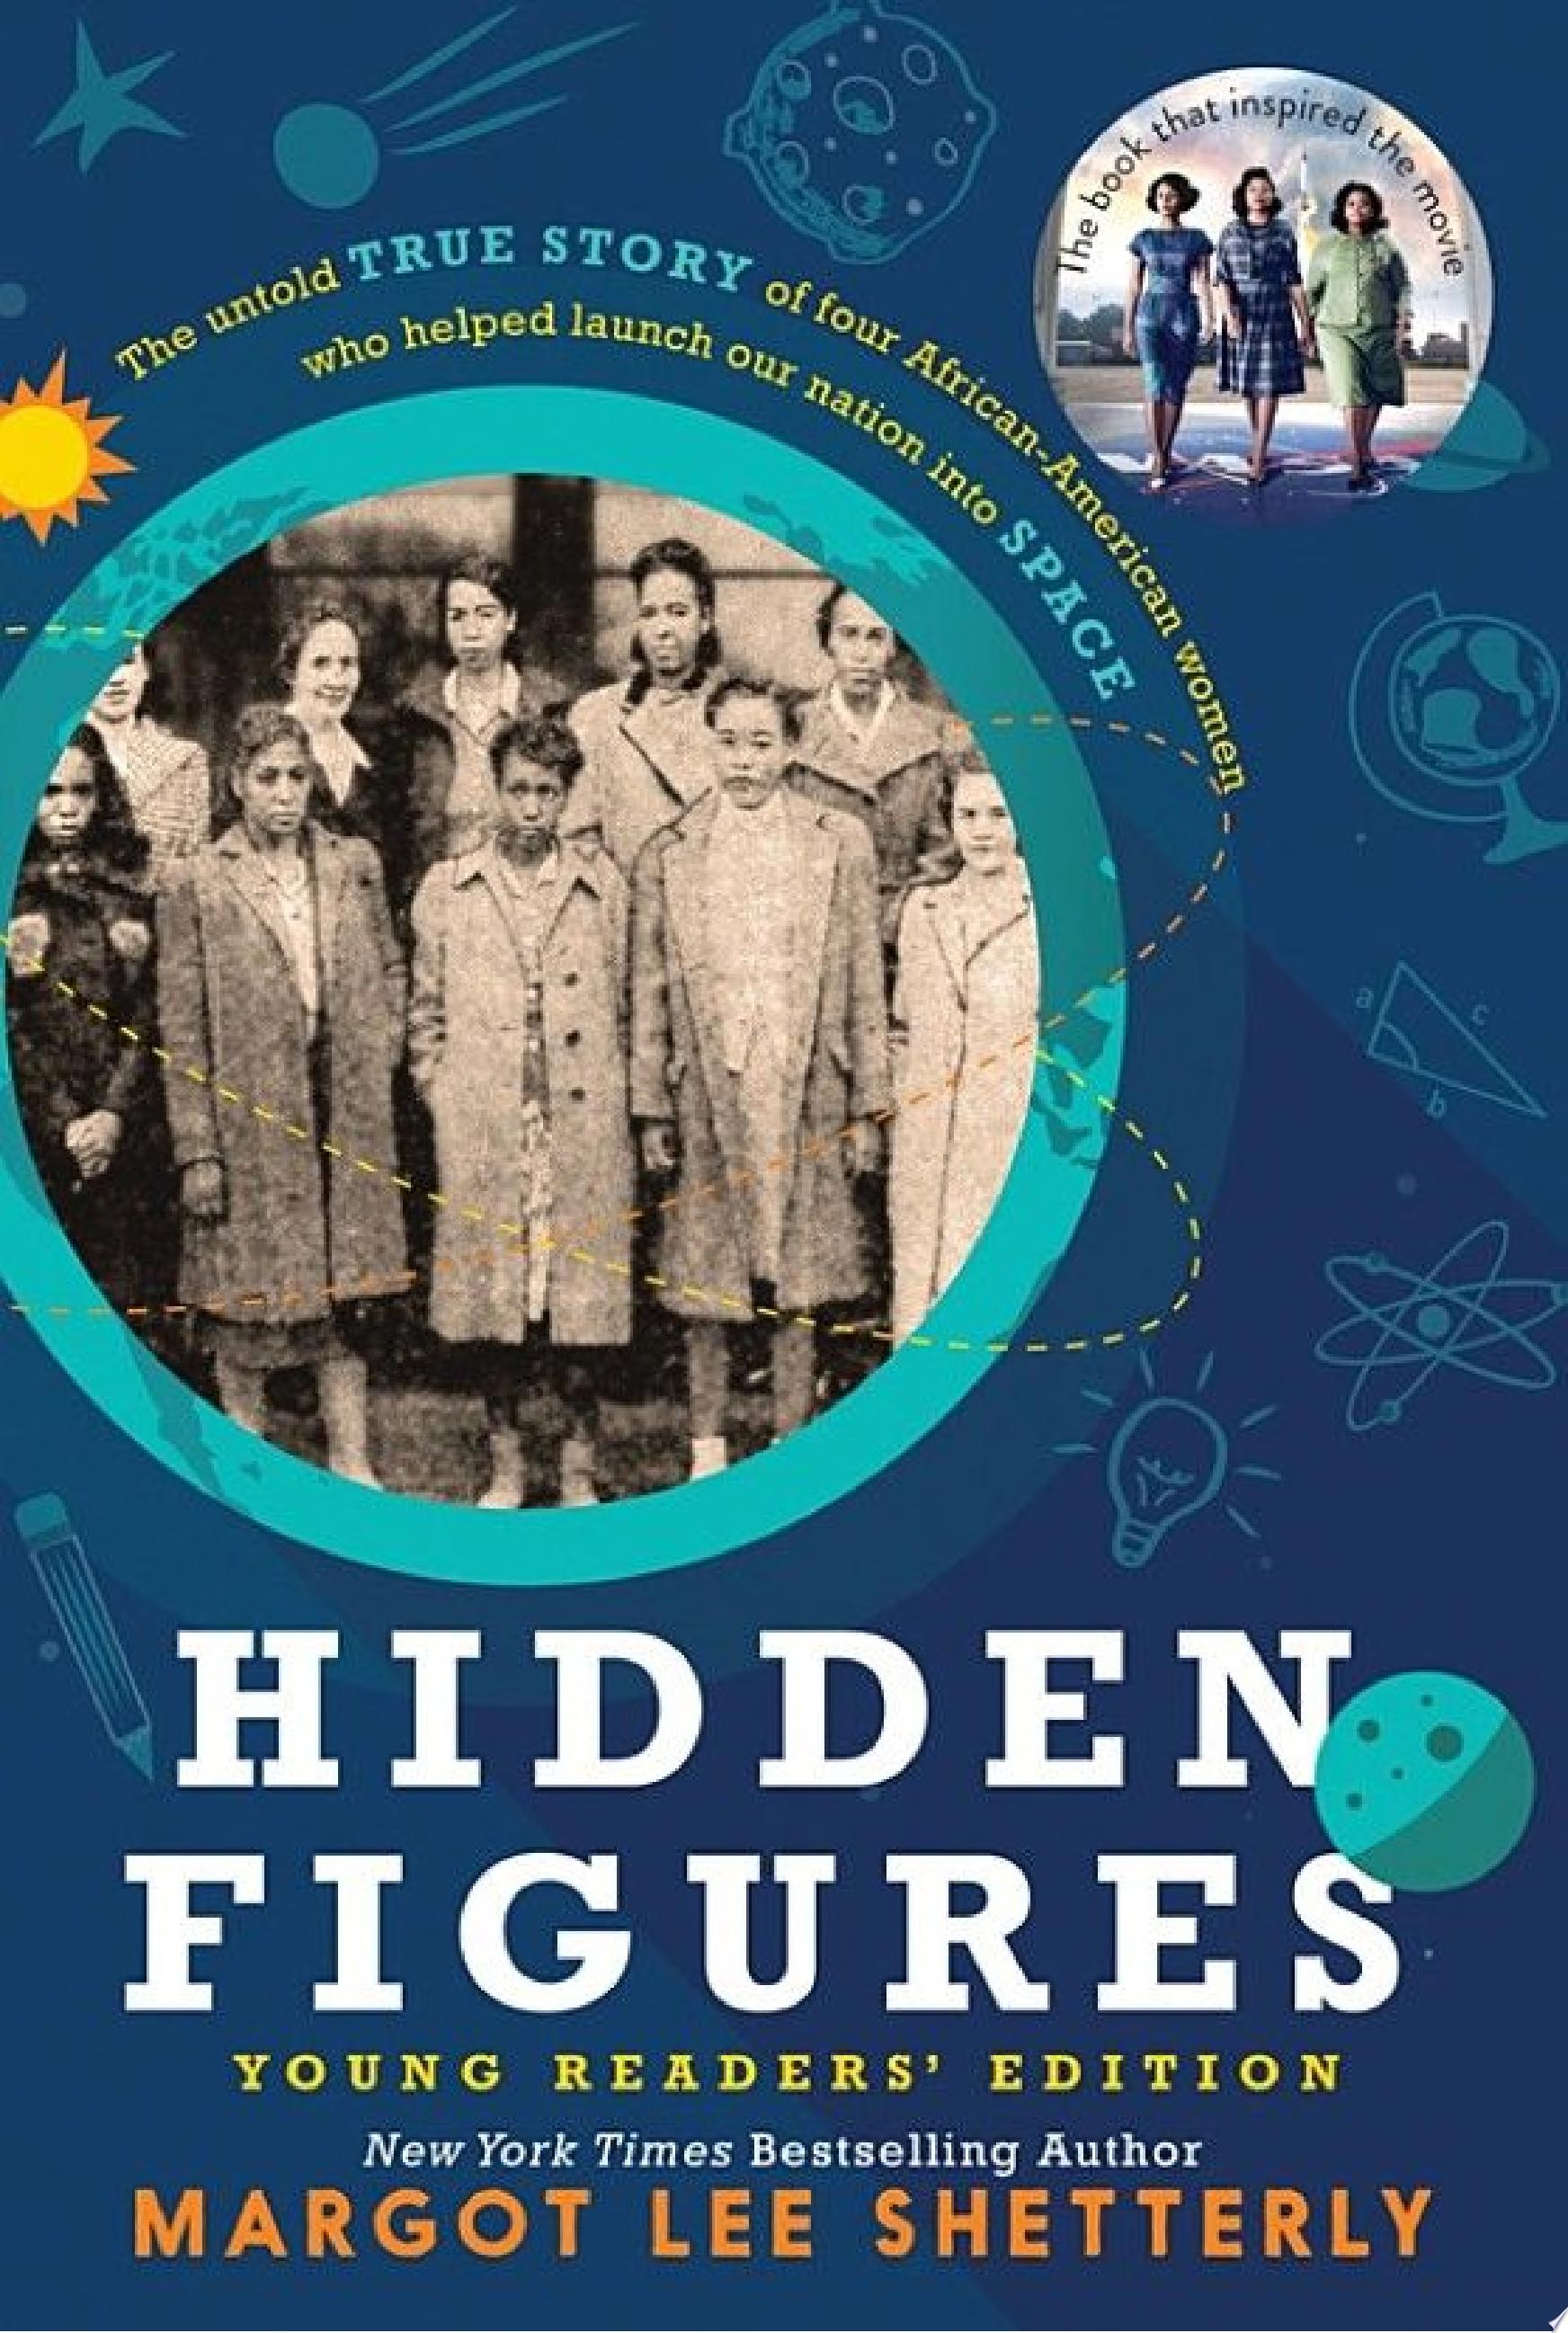 Image for "Hidden Figures Young Readers' Edition"